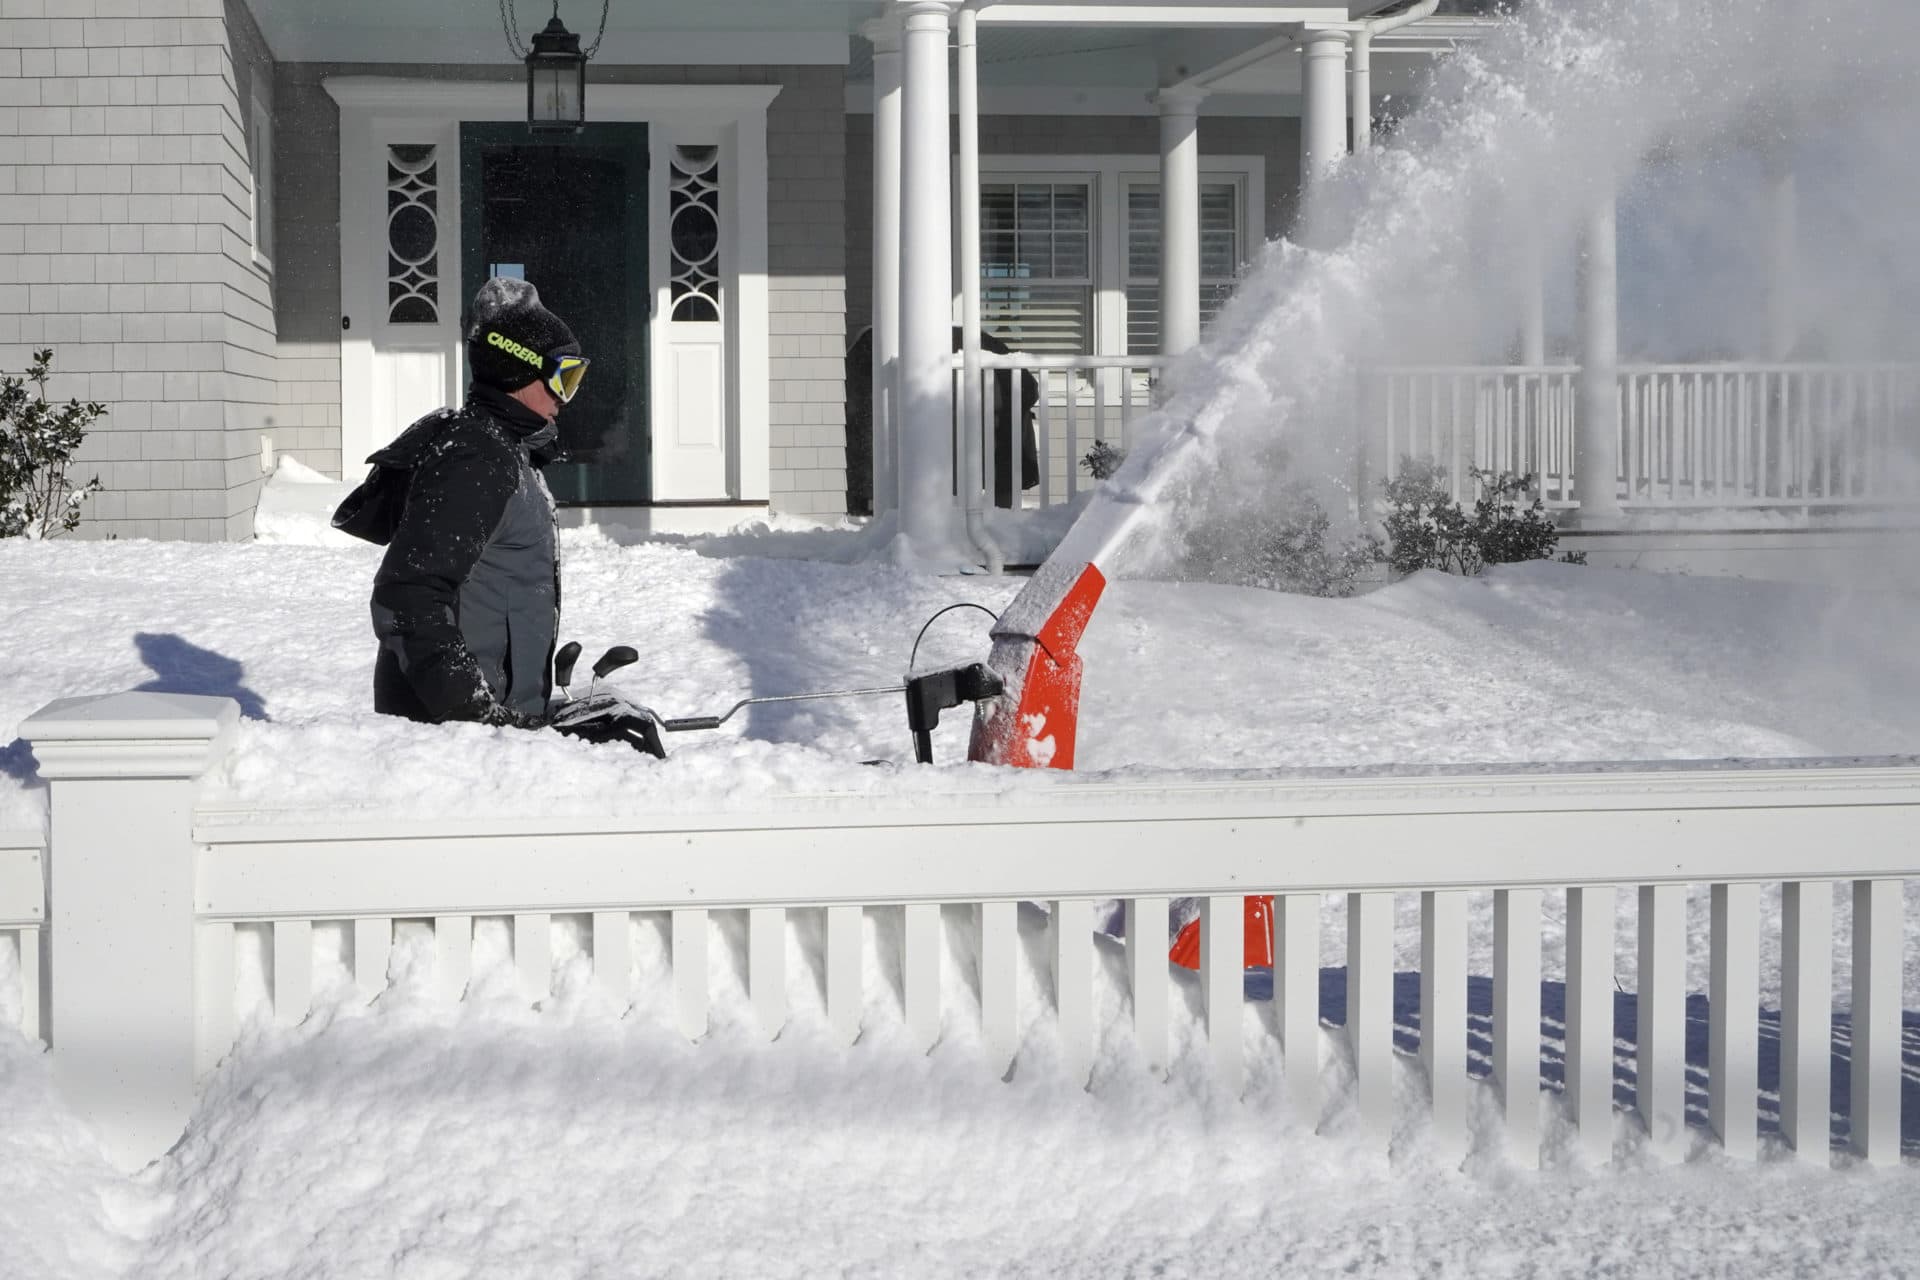 Bill McKelvey, of Scituate, uses a snow blower to clear snow in front of his home, Sunday, Jan. 30, 2022. (Steven Senne/AP)